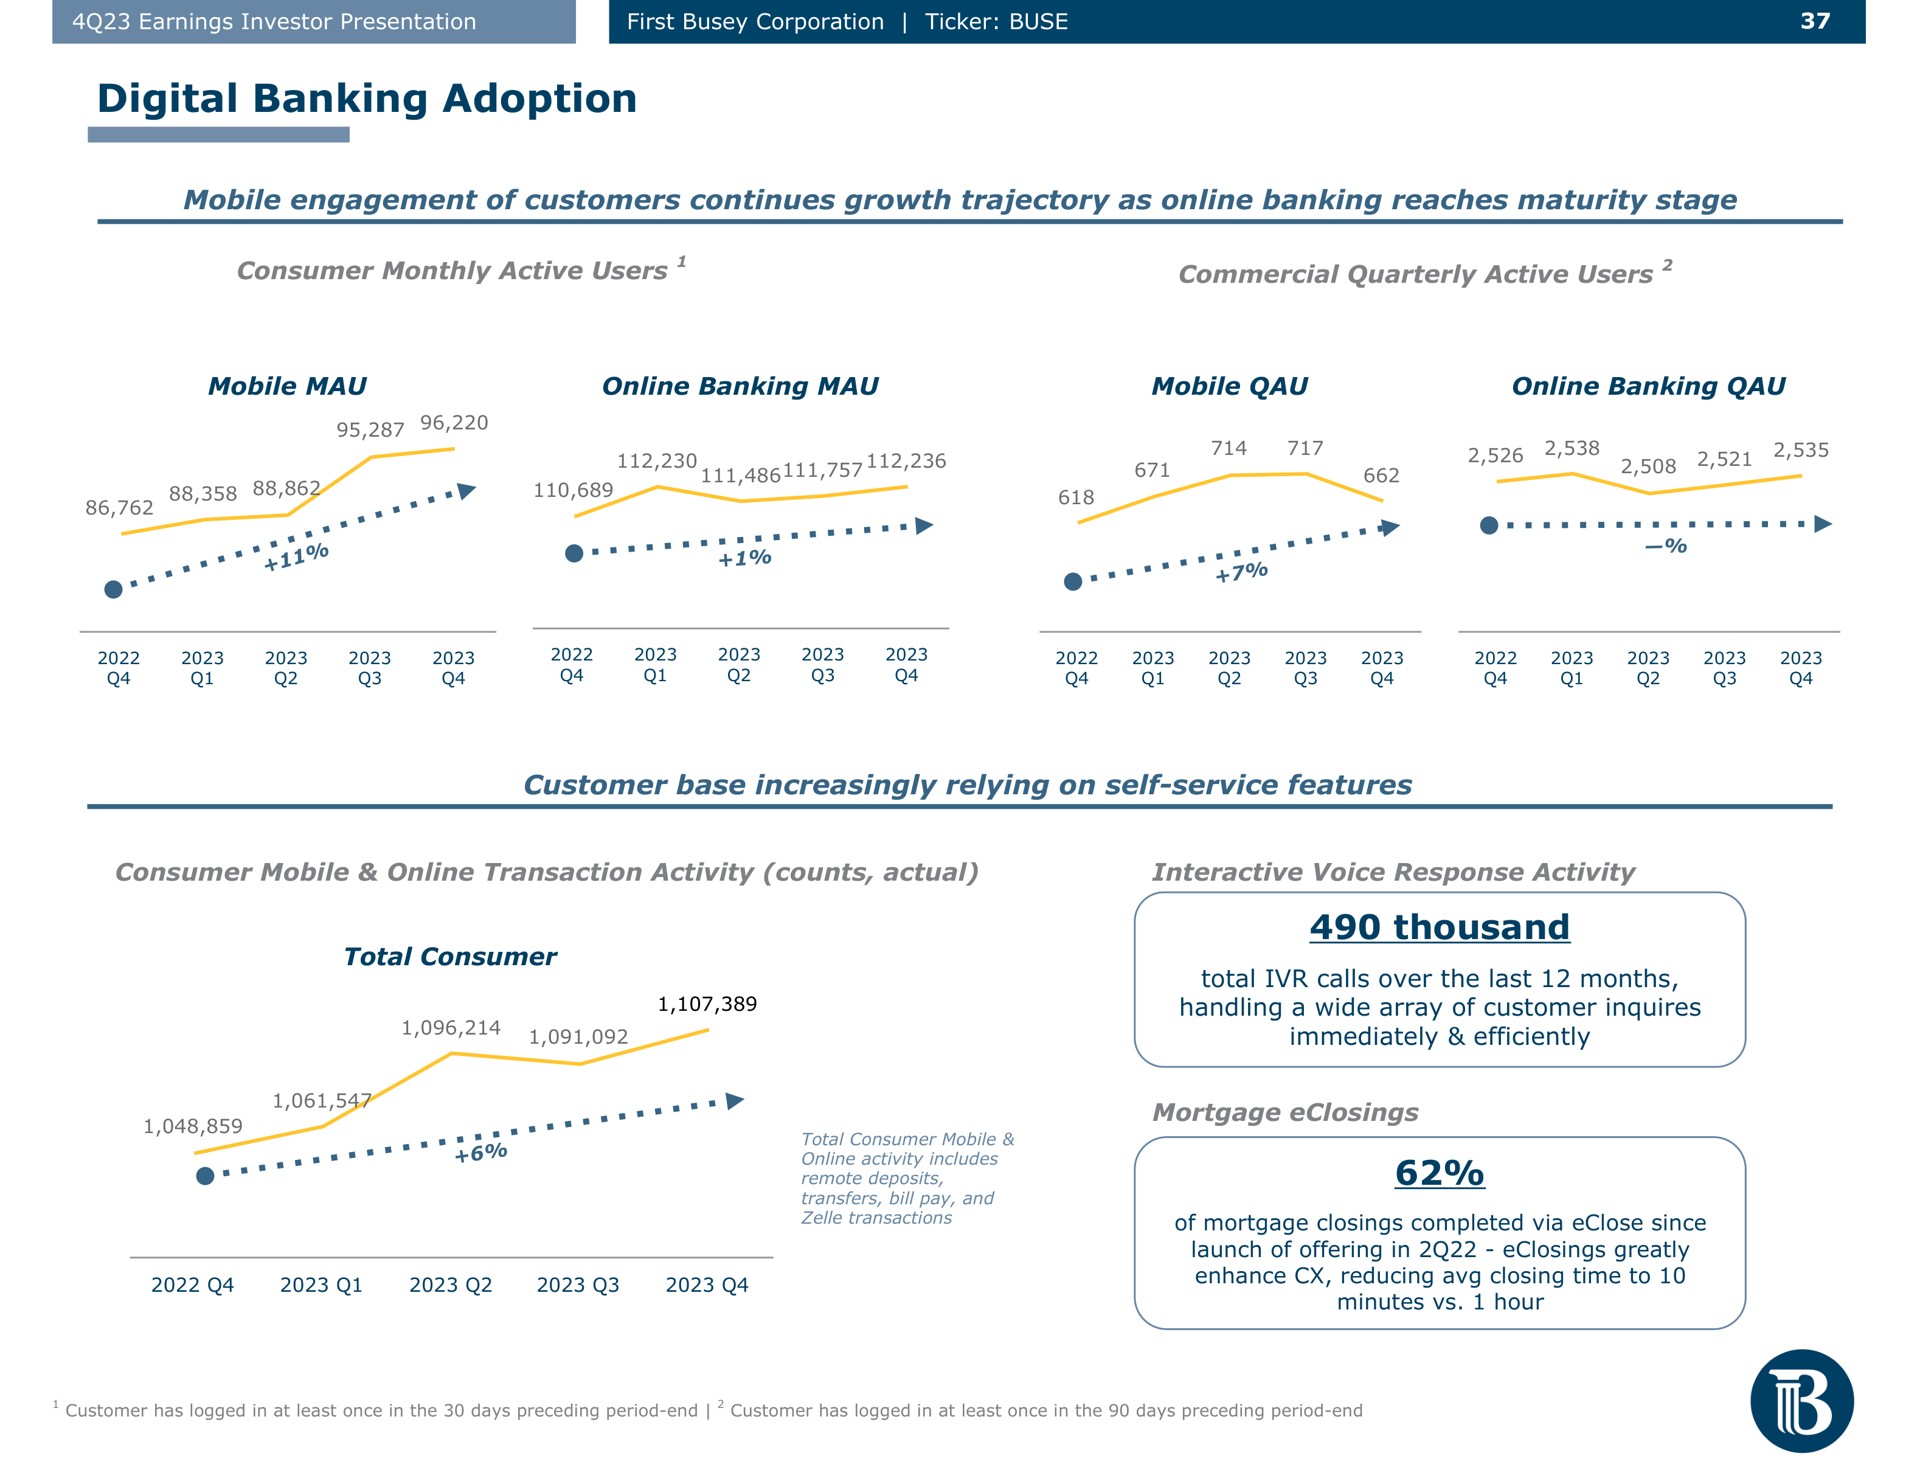 digital banking adoption mobile engagement of customers continues growth trajectory as banking reaches maturity stage customer base increasingly relying on self service features thousand | First Busey